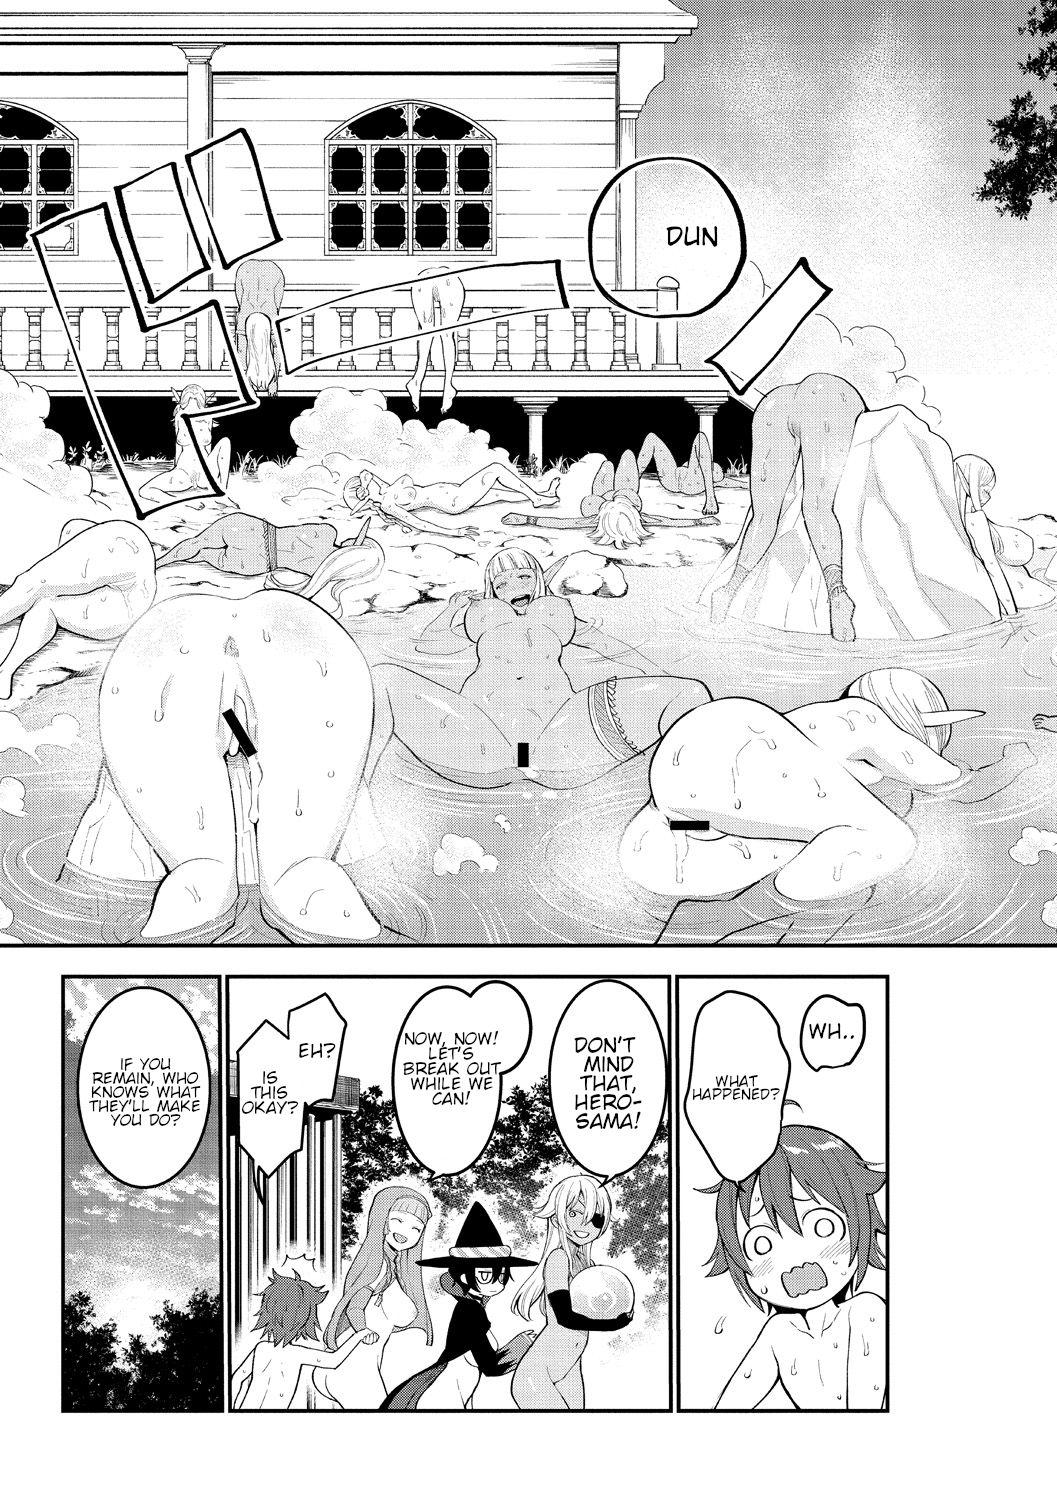 Suck Cock Chintore Quest II: Shota Yuusha Elf no Sato de Dai Rankou | Chintore Quest II: Shota Hero and the Great Elf Village Orgy Girlfriend - Page 27